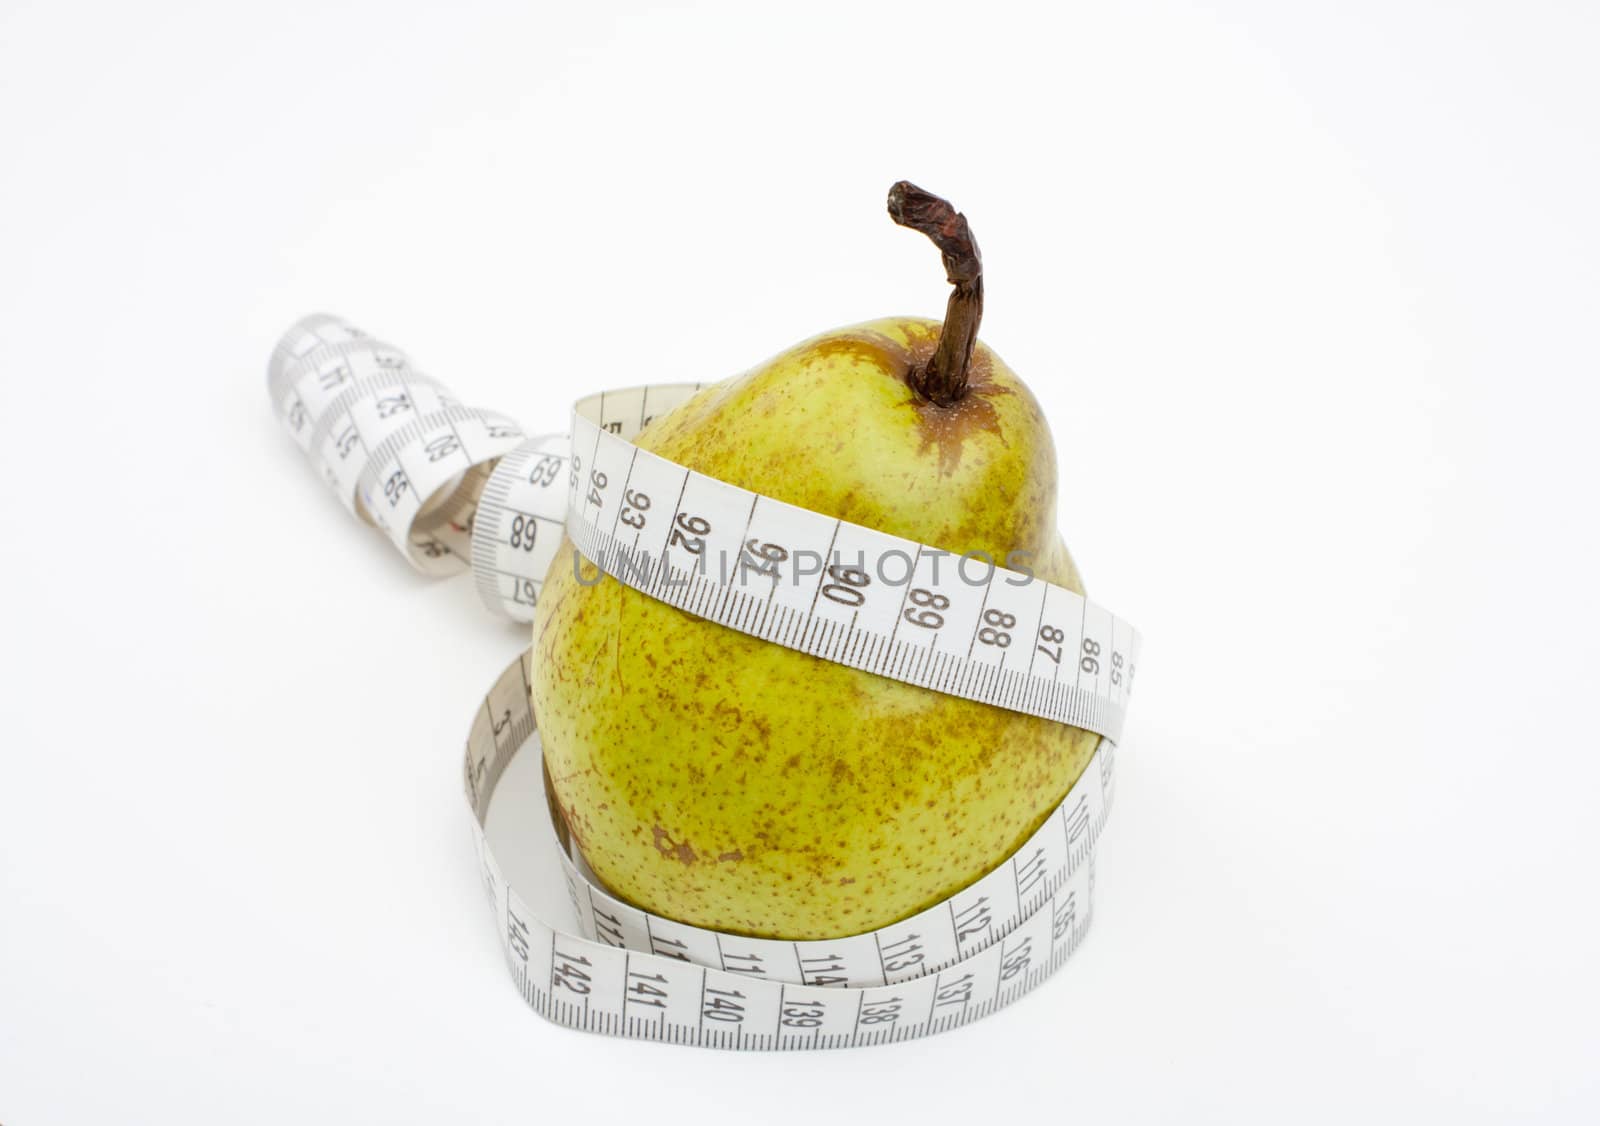 Tape measure wrapped around the pear, close-up.